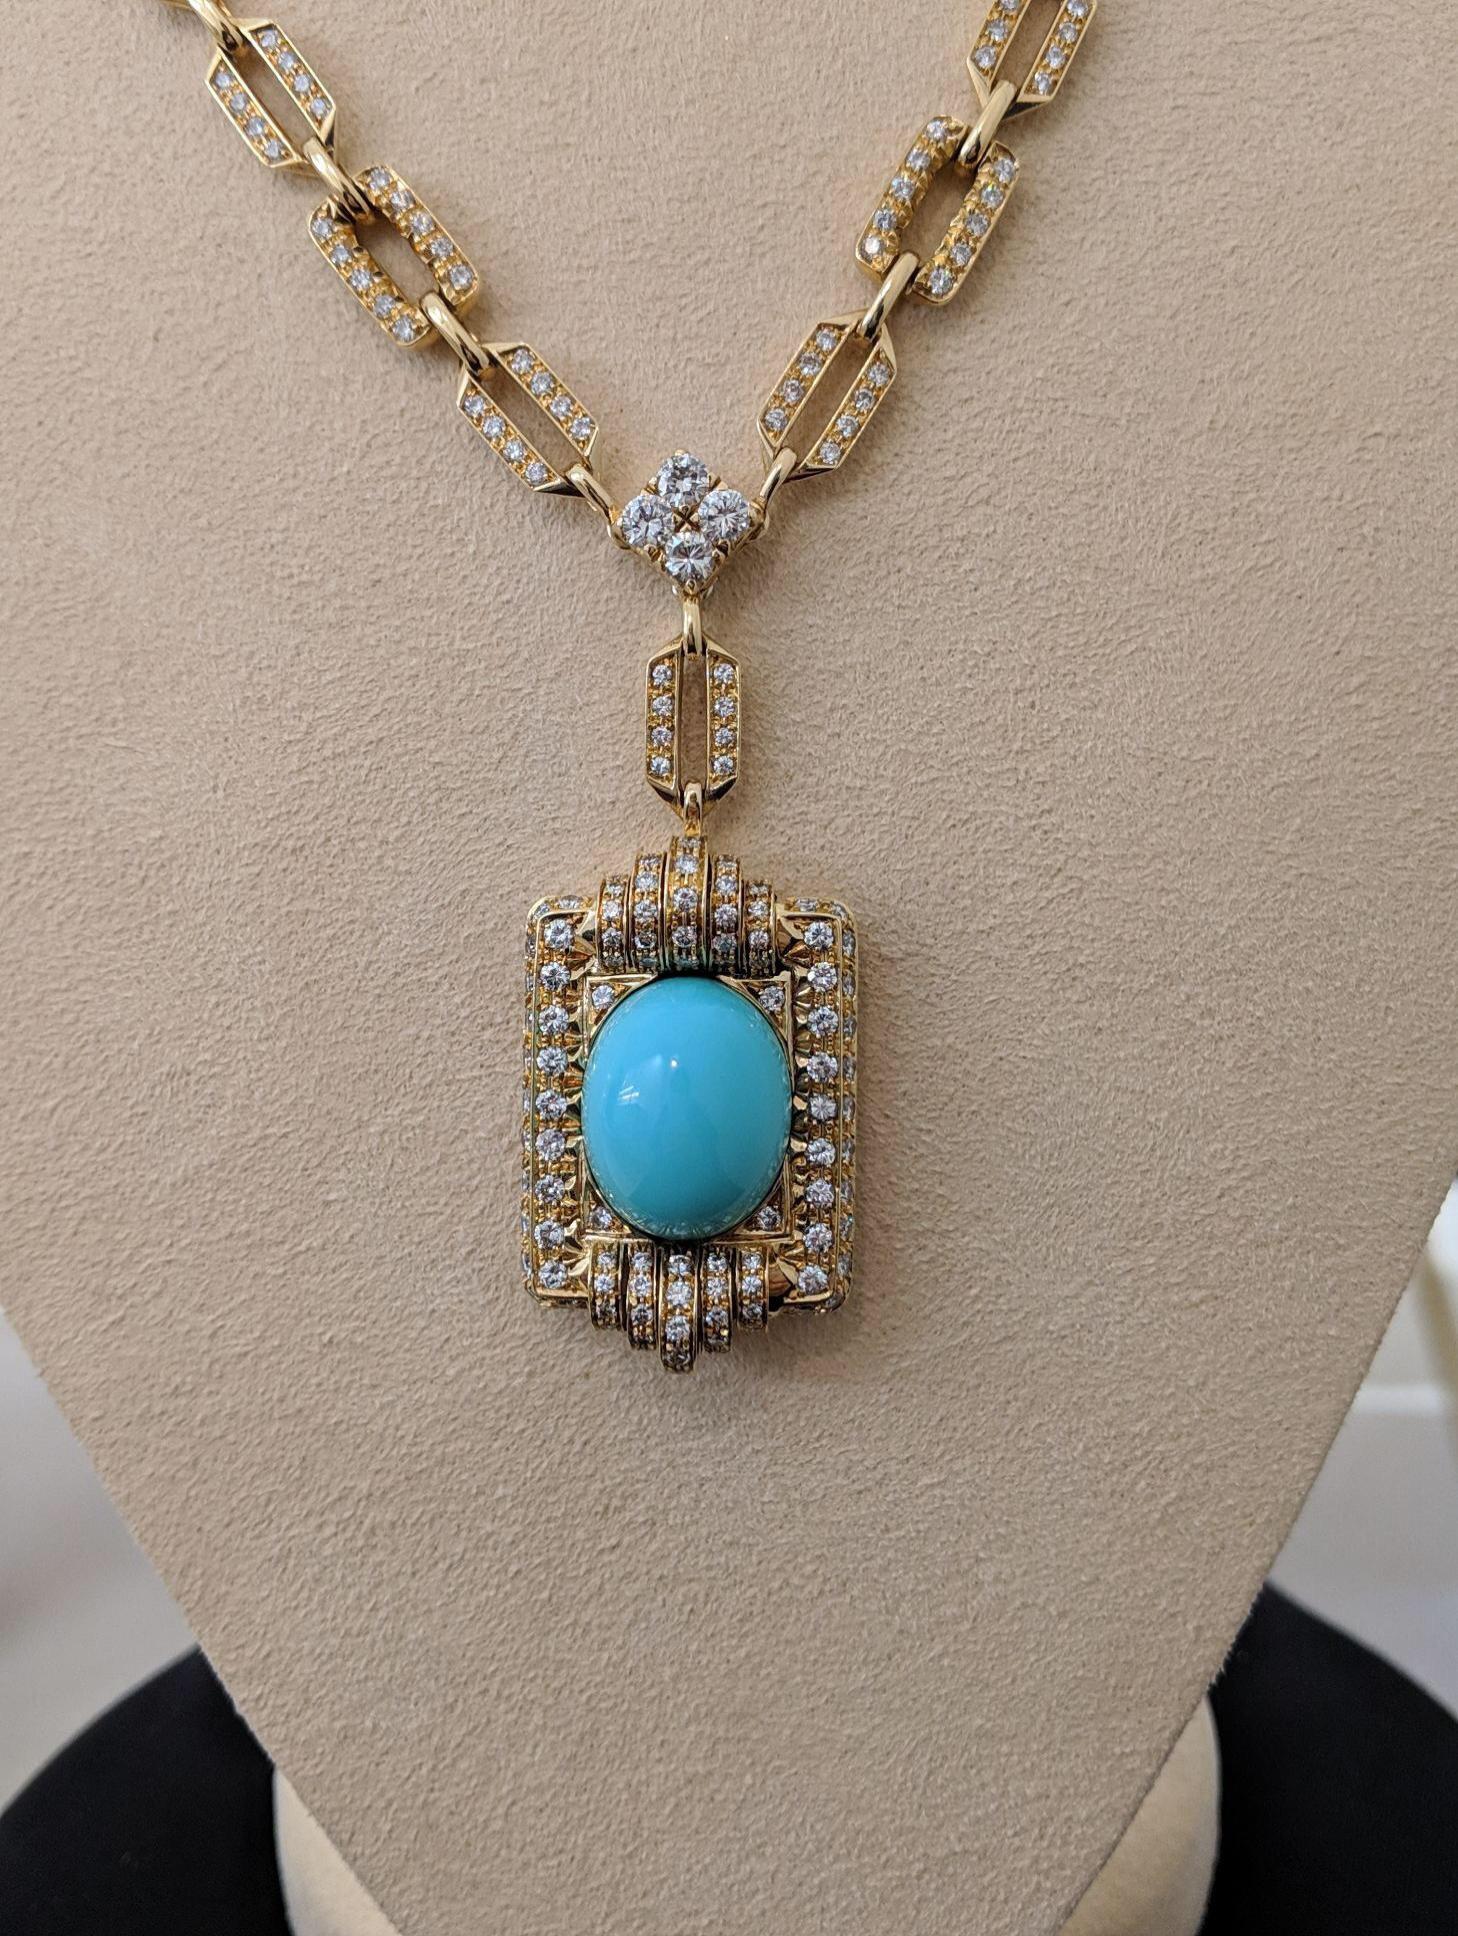 Vintage 18Kt Gold, 9.42ct. Diamond Necklace with a 21.02ct Persian Turquoise 2